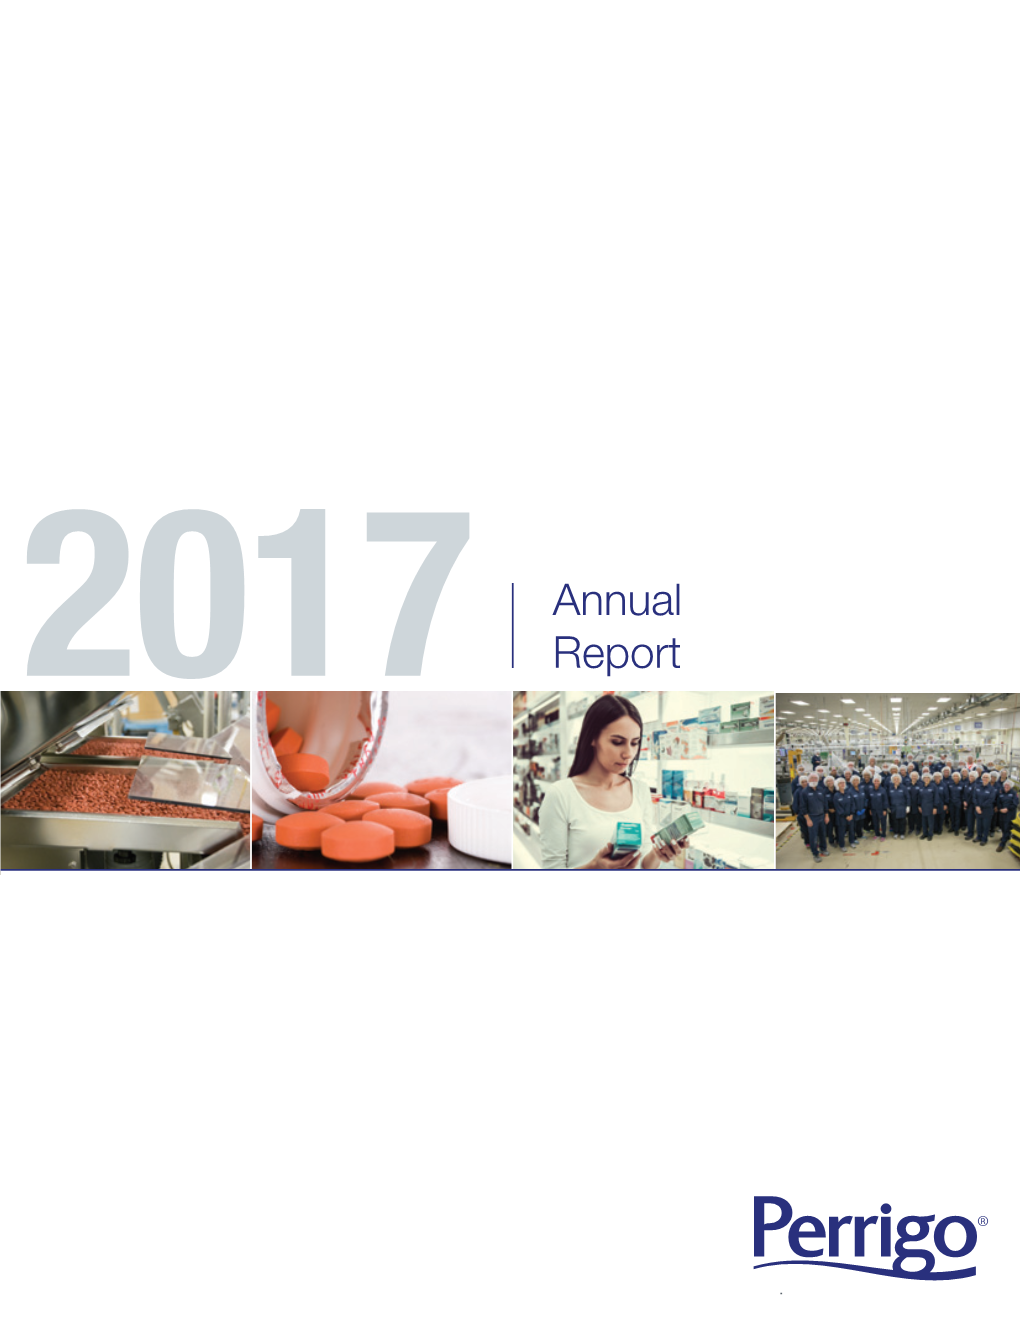 ANNUAL REPORT 2017 3 2 Excludes Unusual Tax Payment of $74 Million and Restructuring Payments of $60 Million MESSAGE from LAURIE BRLAS, CHAIRMAN